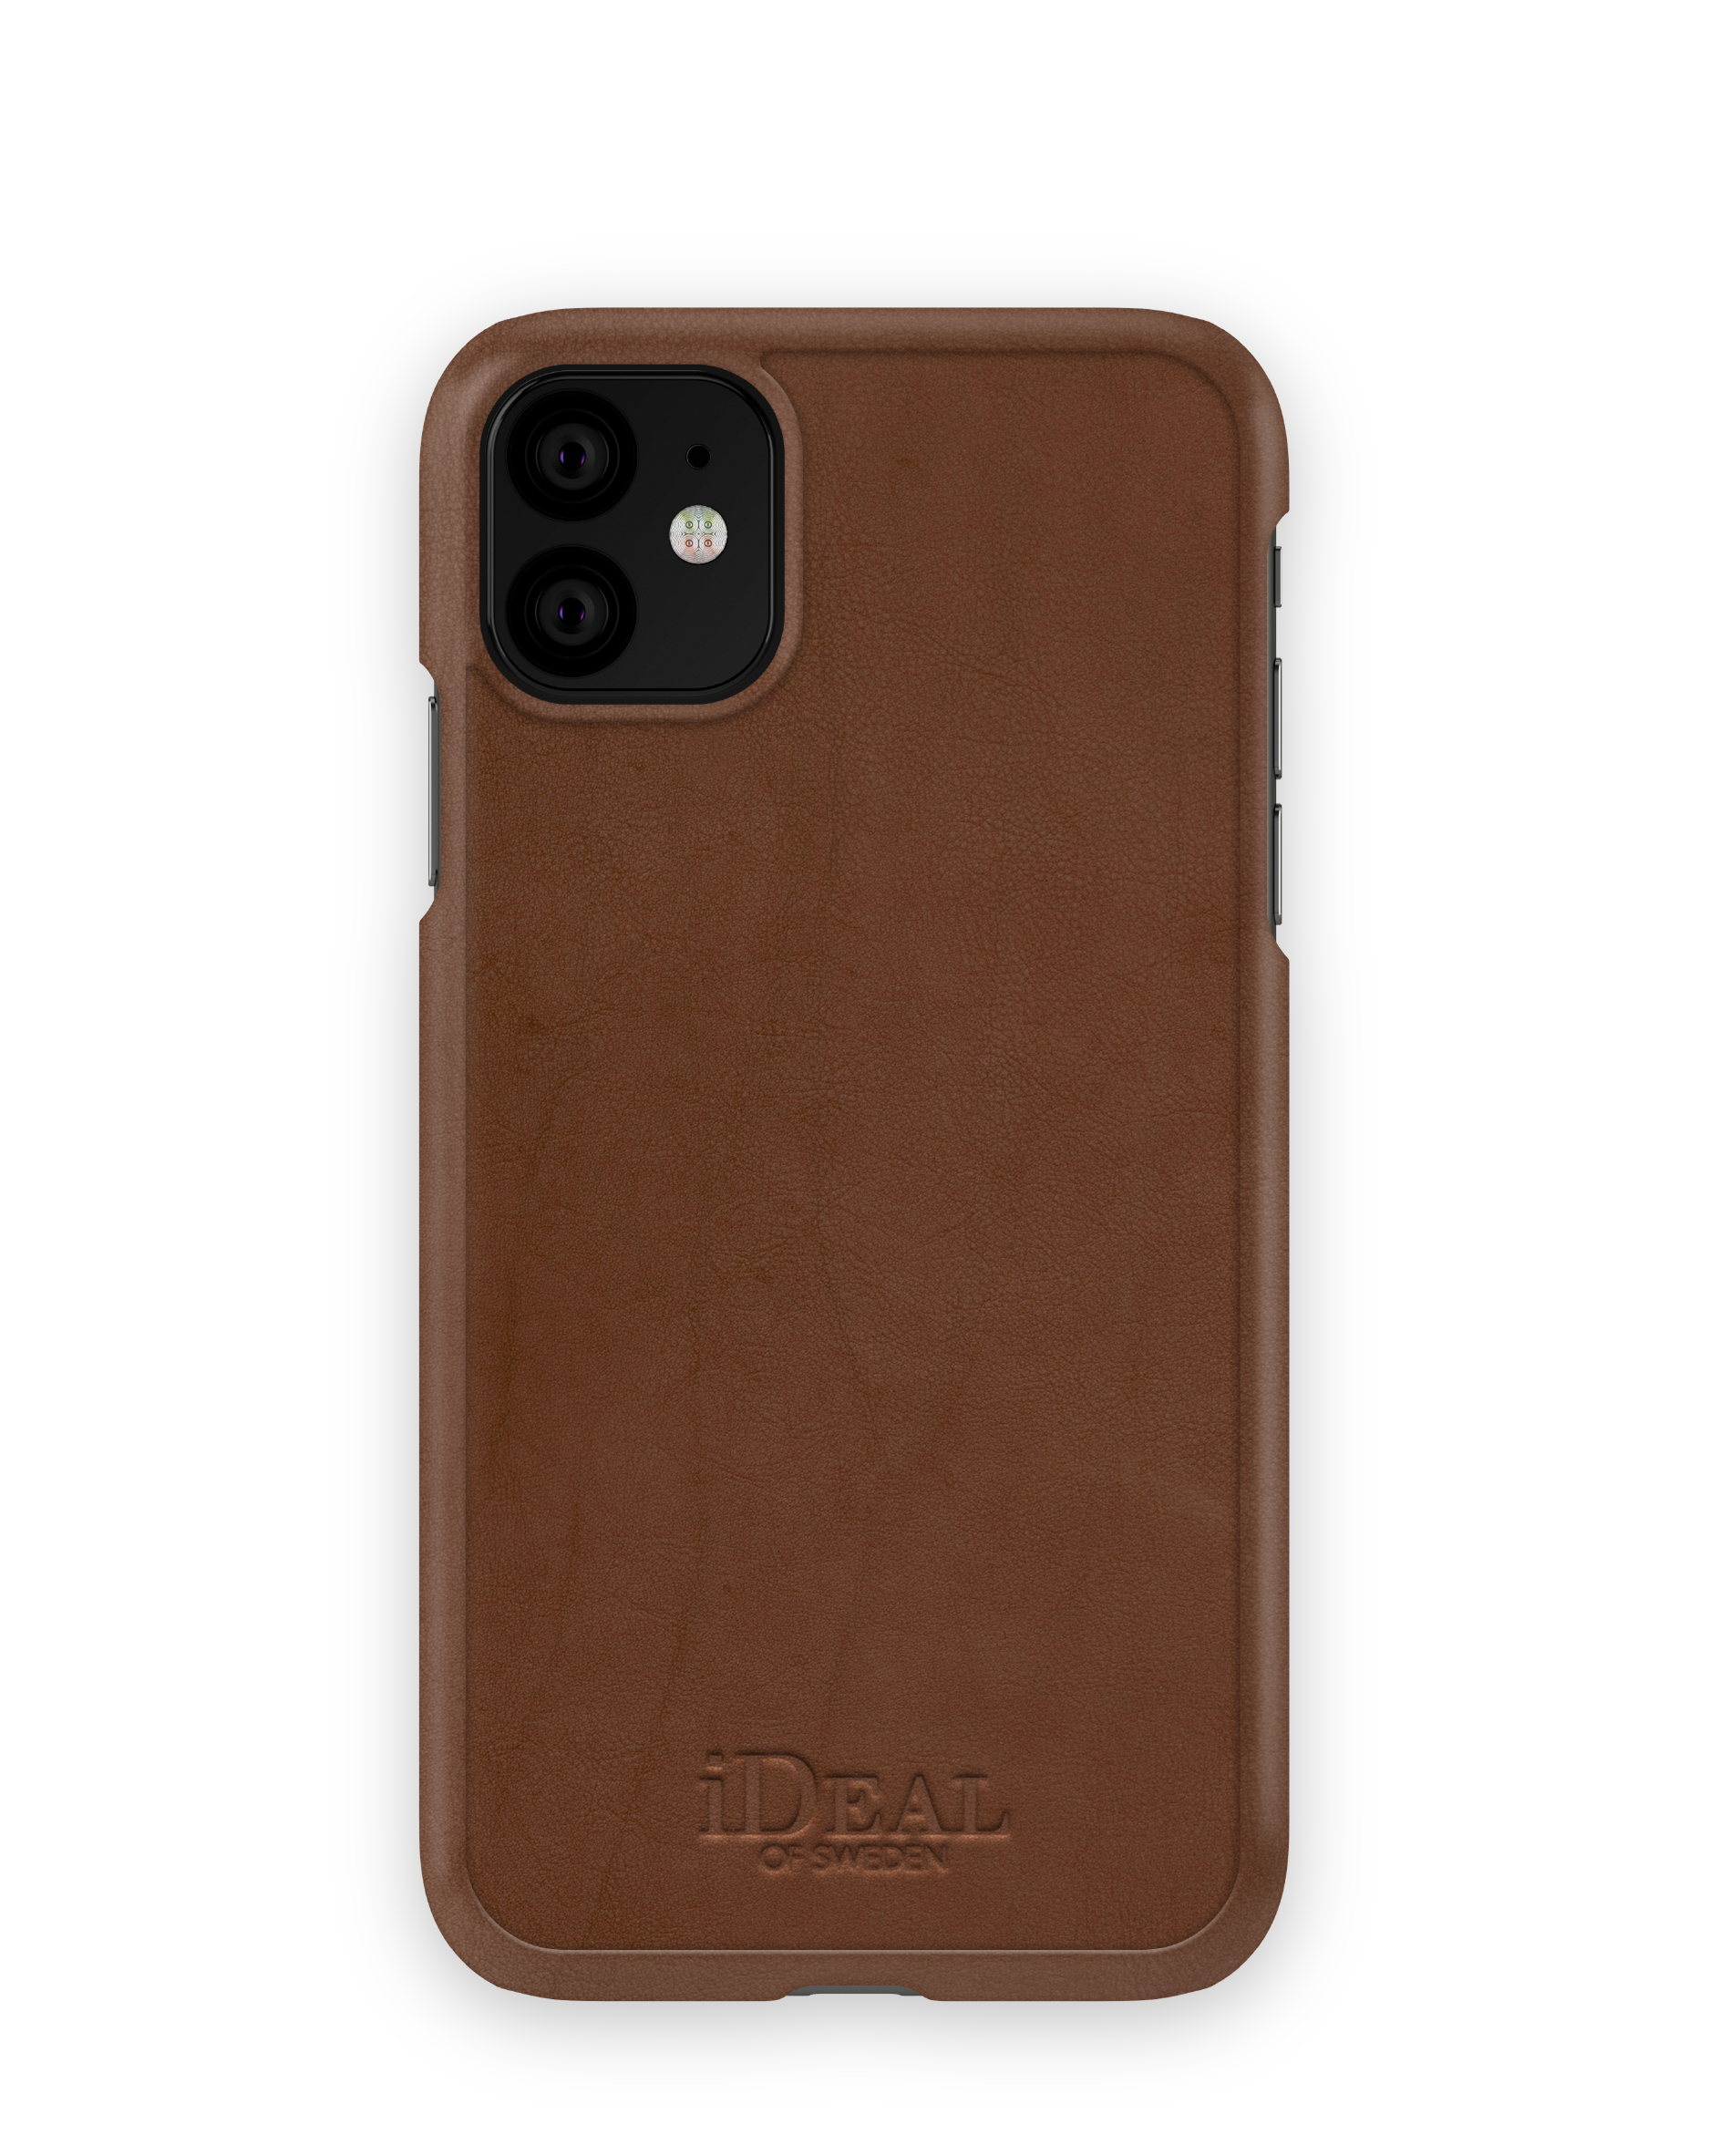 iPhone XR, IDFC-I1961-COM-03, iPhone Apple, Apple SWEDEN Backcover, Apple 11, OF IDEAL Brown